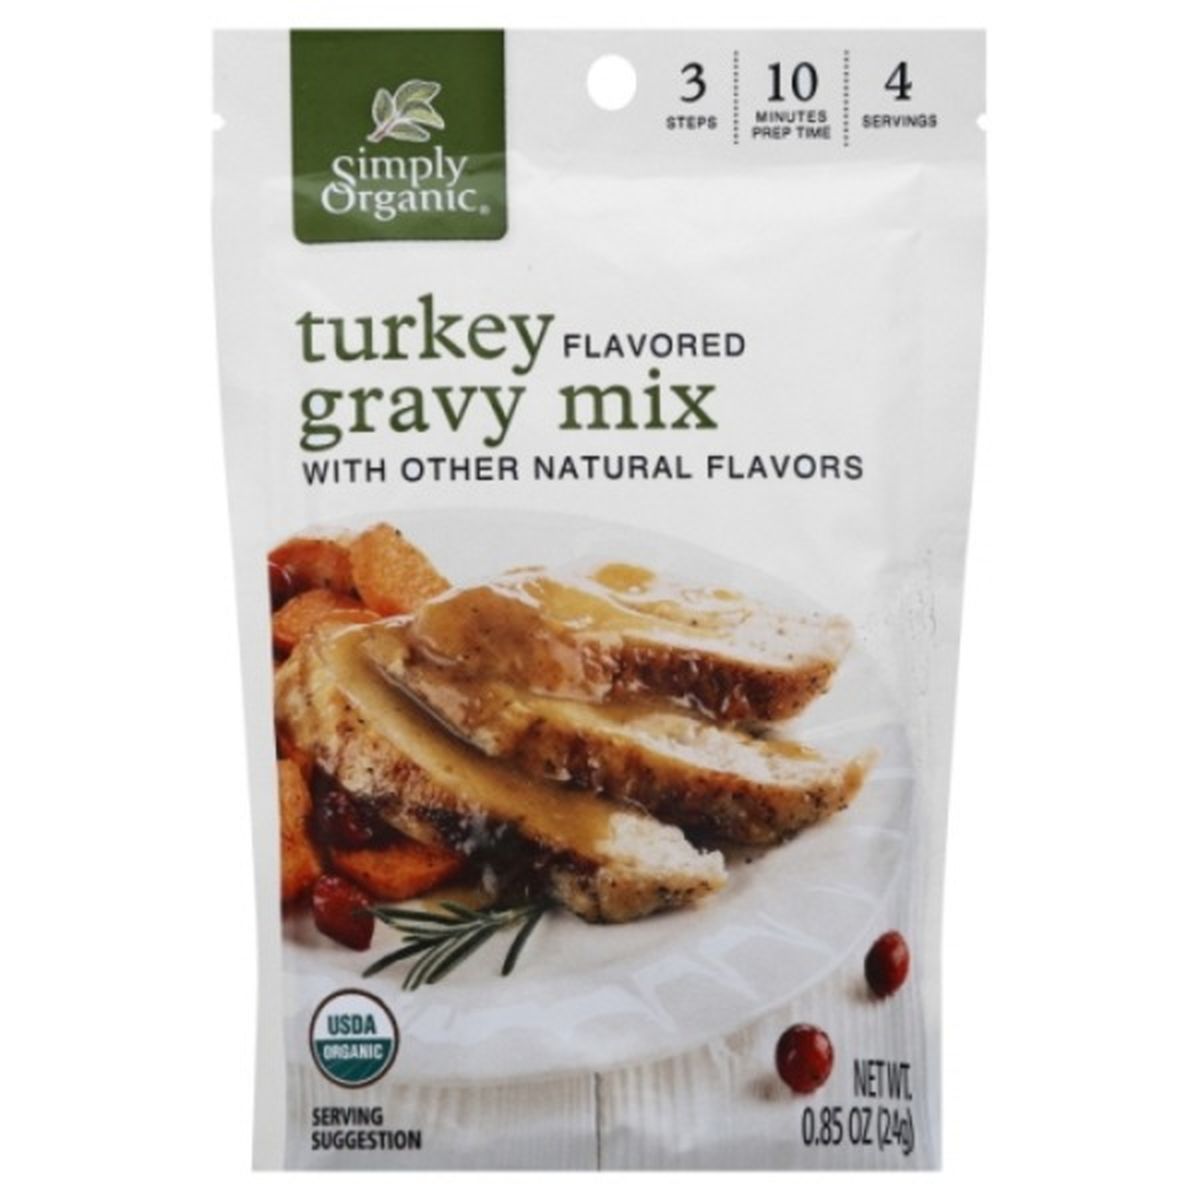 Calories in Simply Organic Gravy Mix, Turkey Flavored